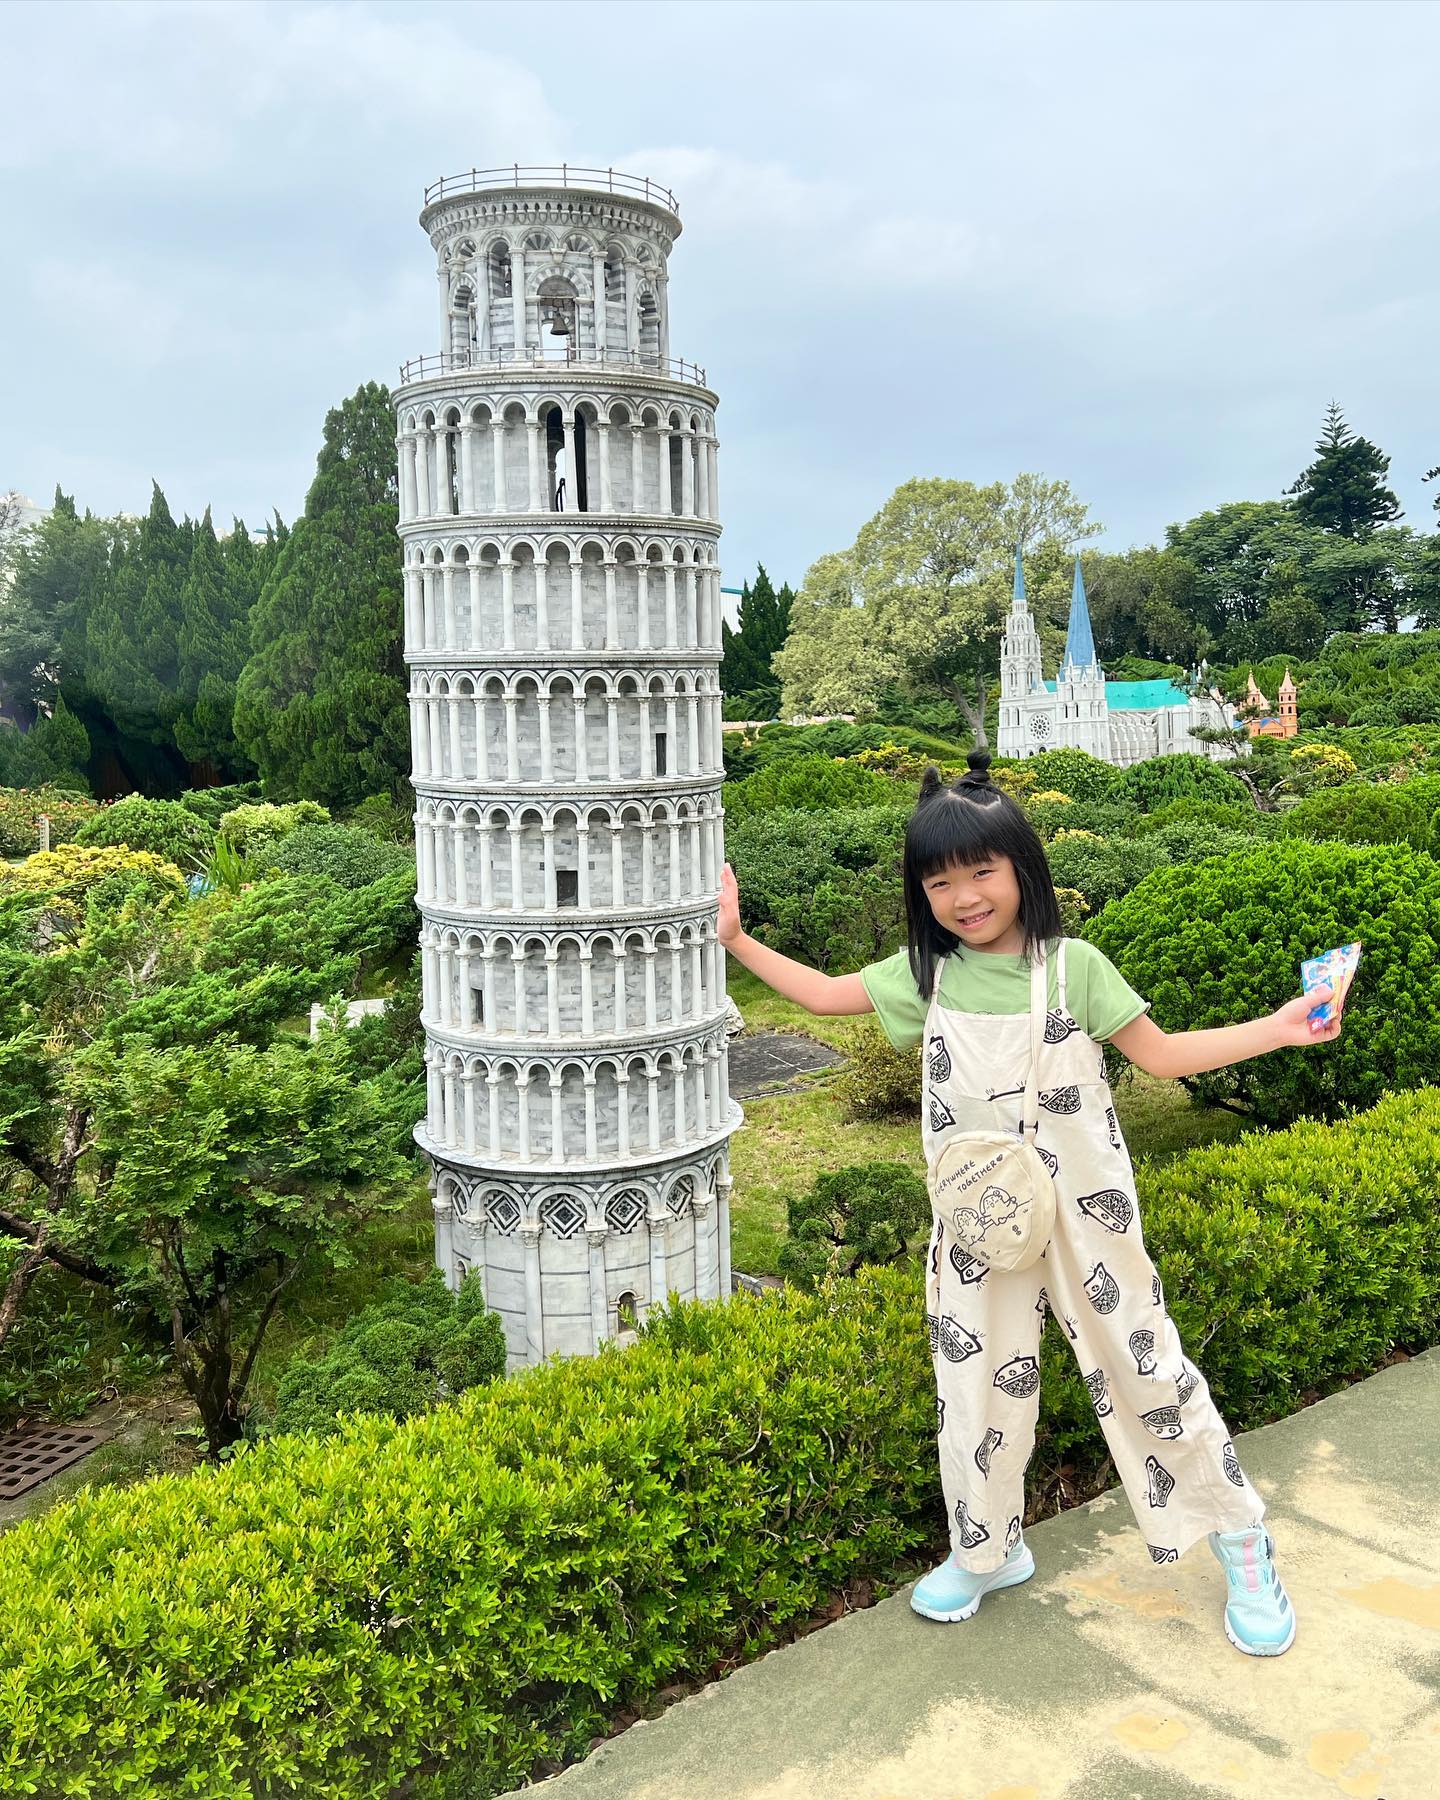 12 Kid-Friendly Things In Taiwan - Over 100 historical miniatures at the Window on the World park